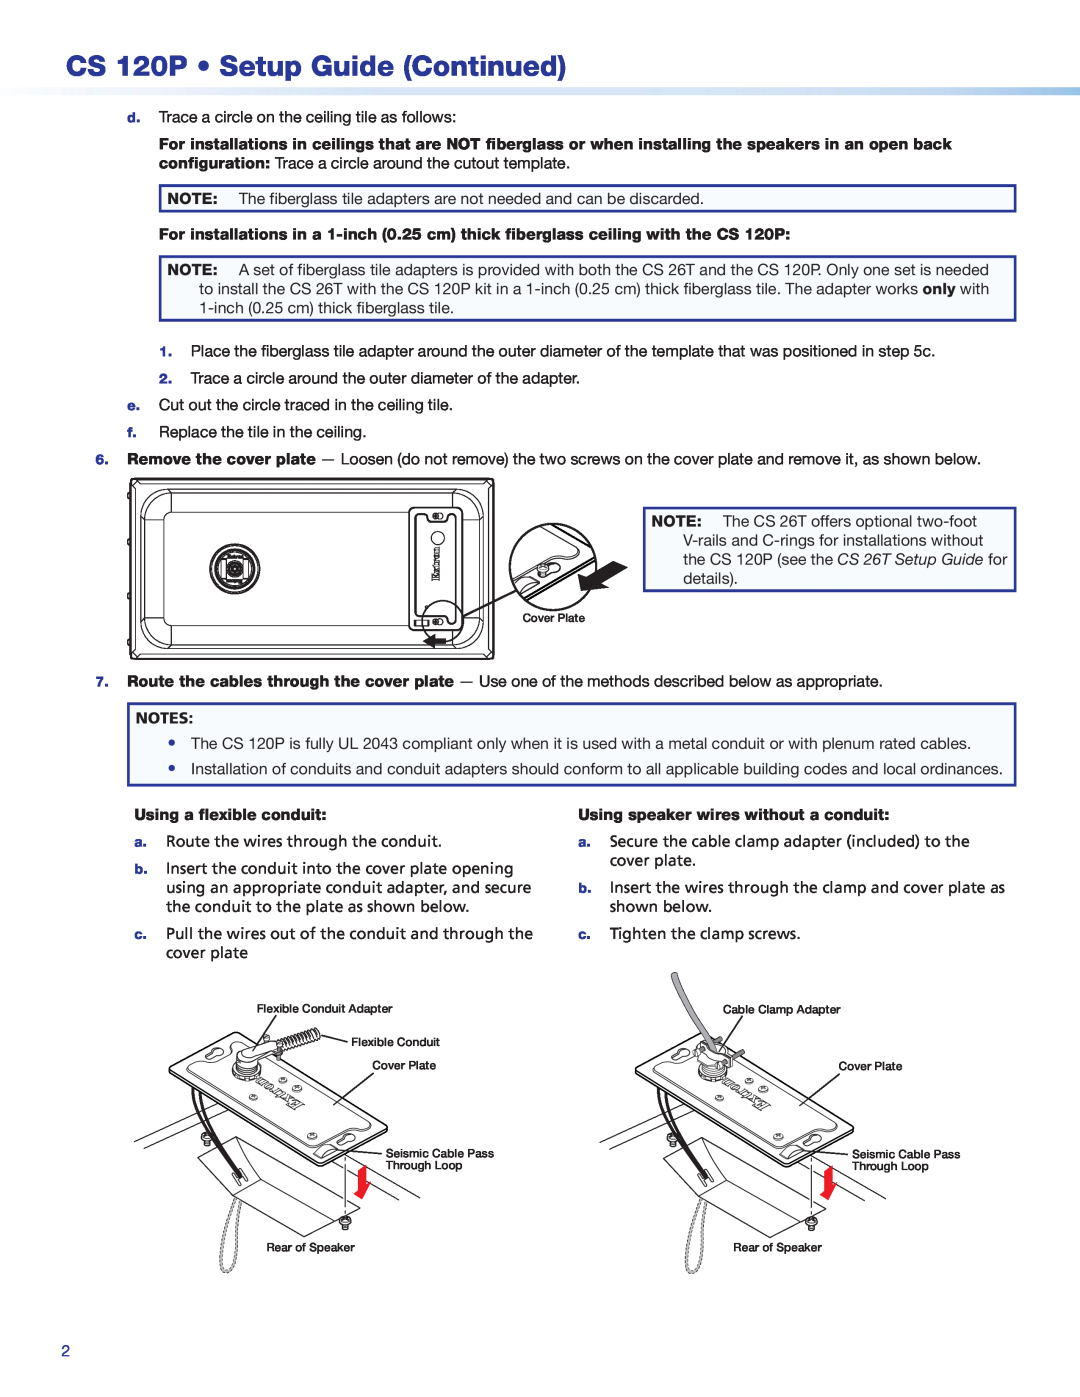 Extron electronic CS 120P Setup Guide Continued, Using a flexible conduit, Using speaker wires without a conduit 